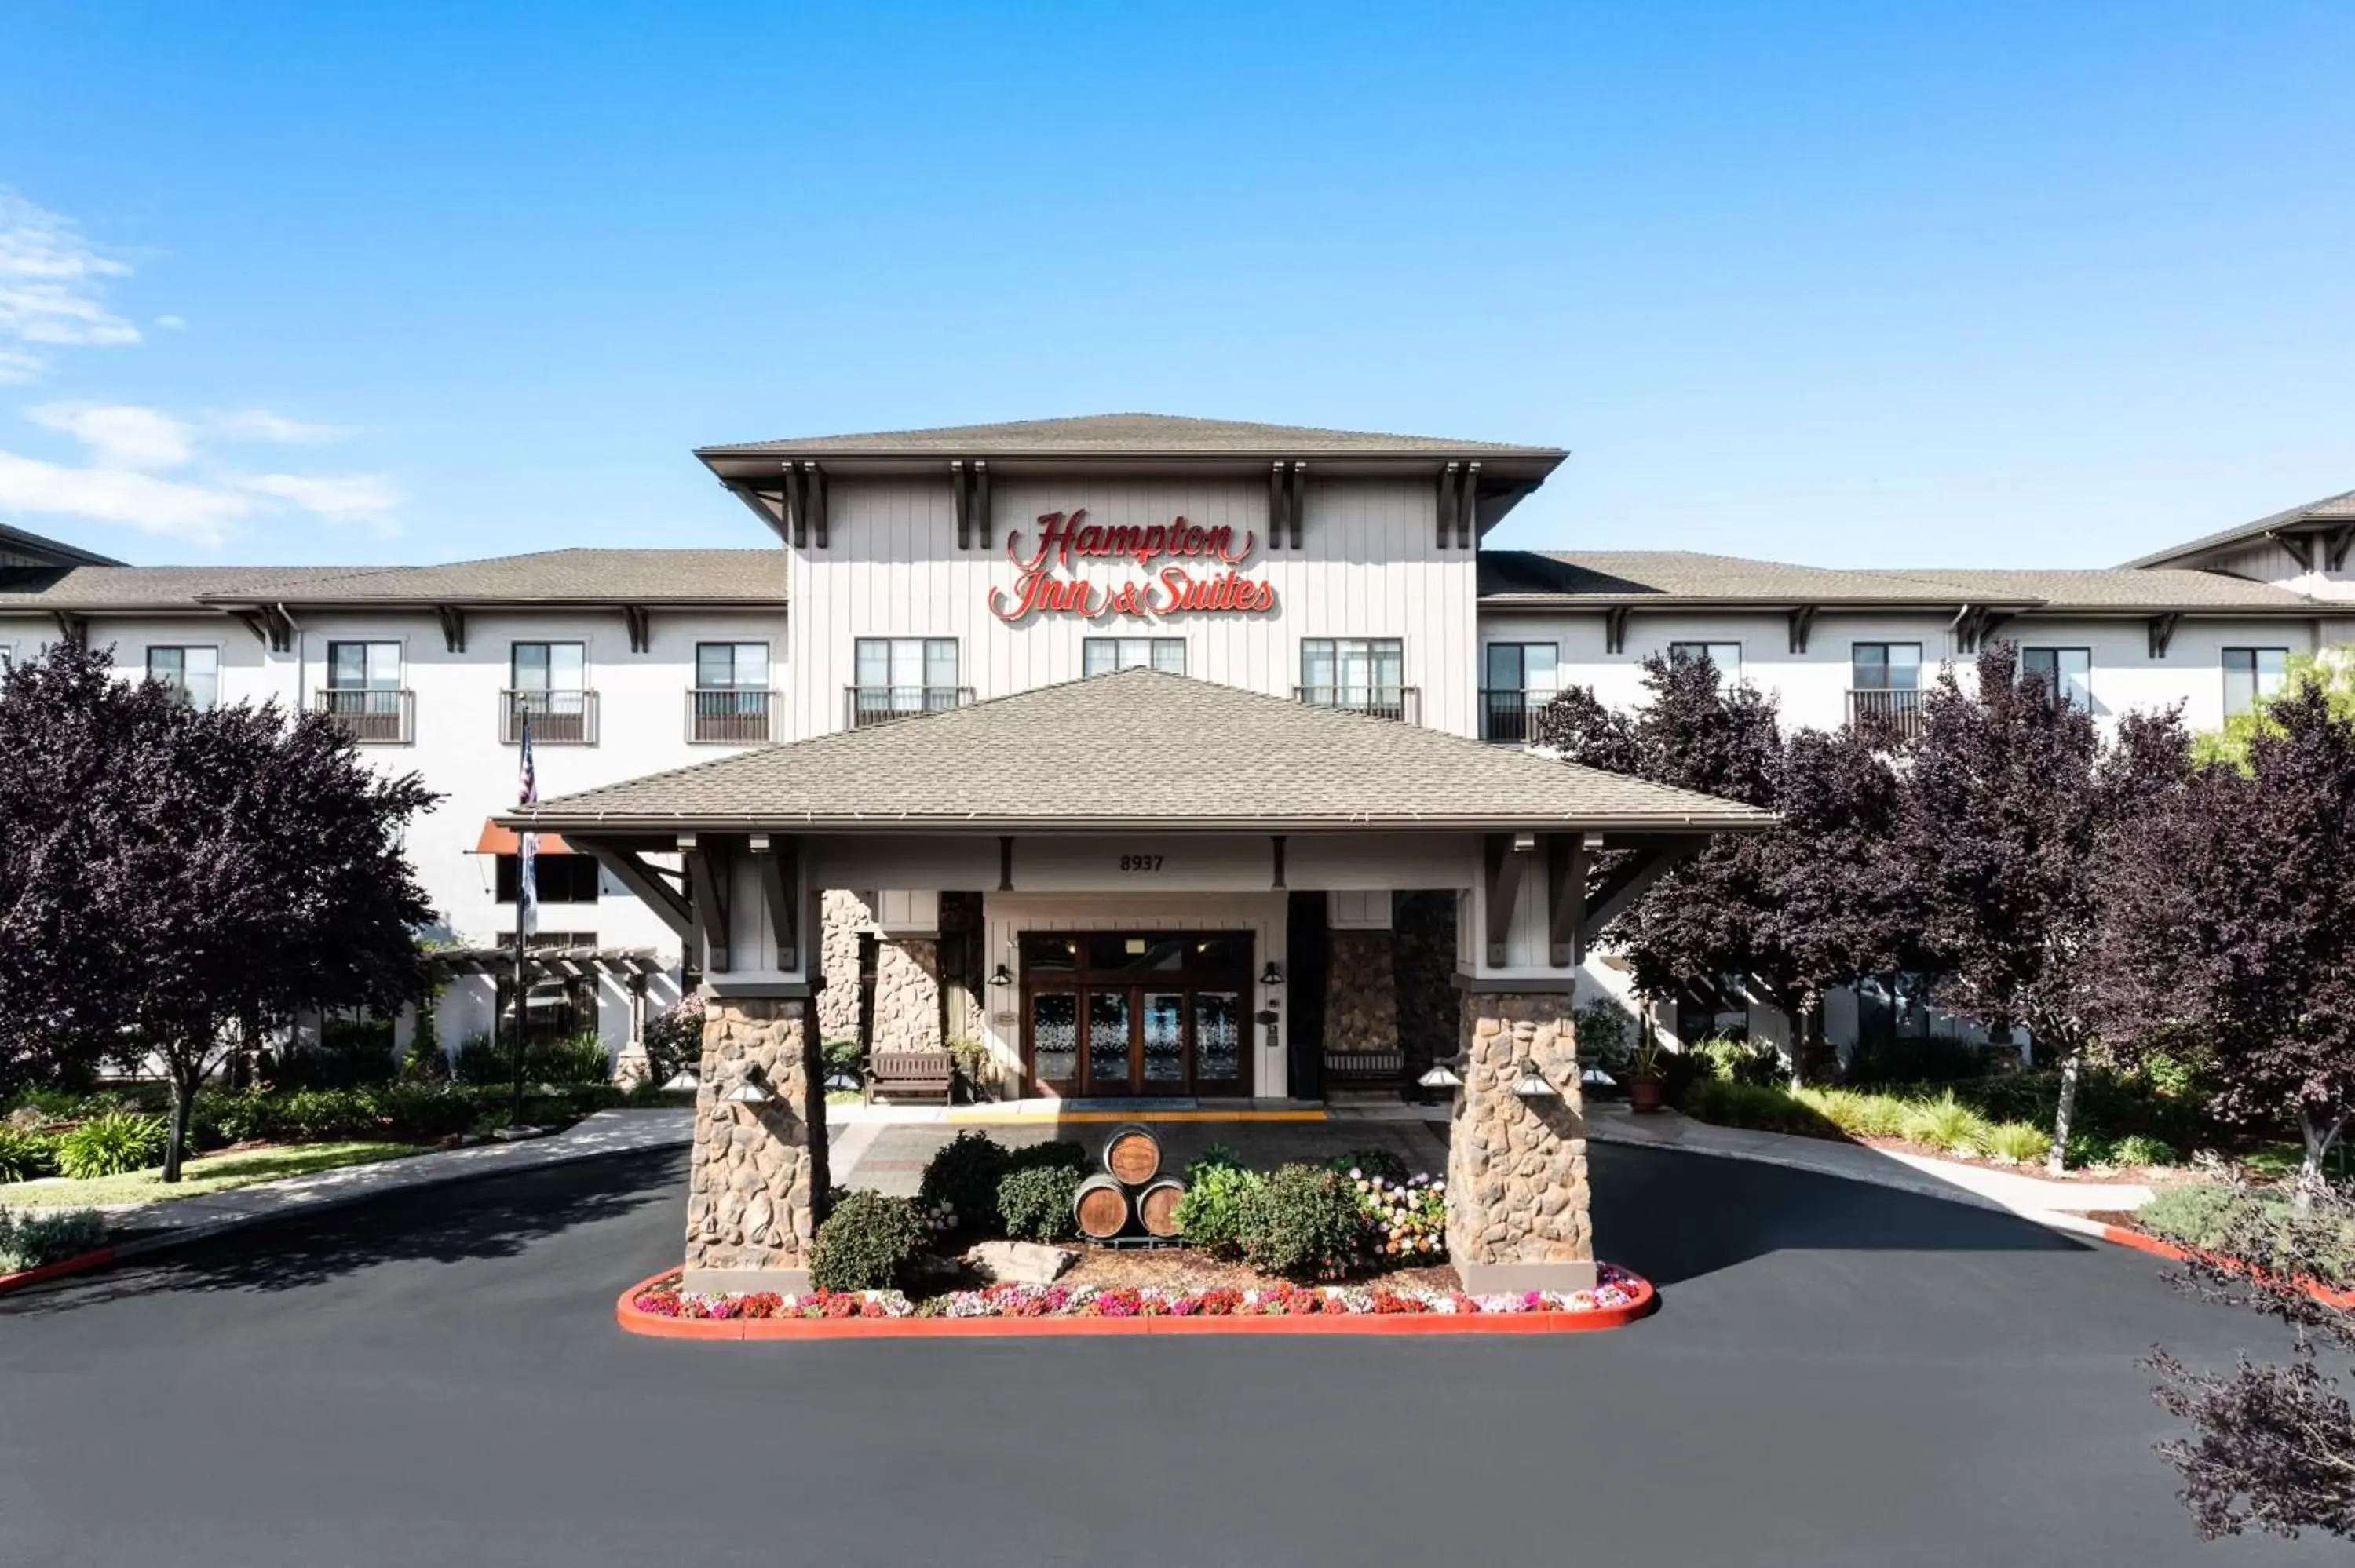 Property Building in Hampton Inn & Suites Windsor-Sonoma Wine Country